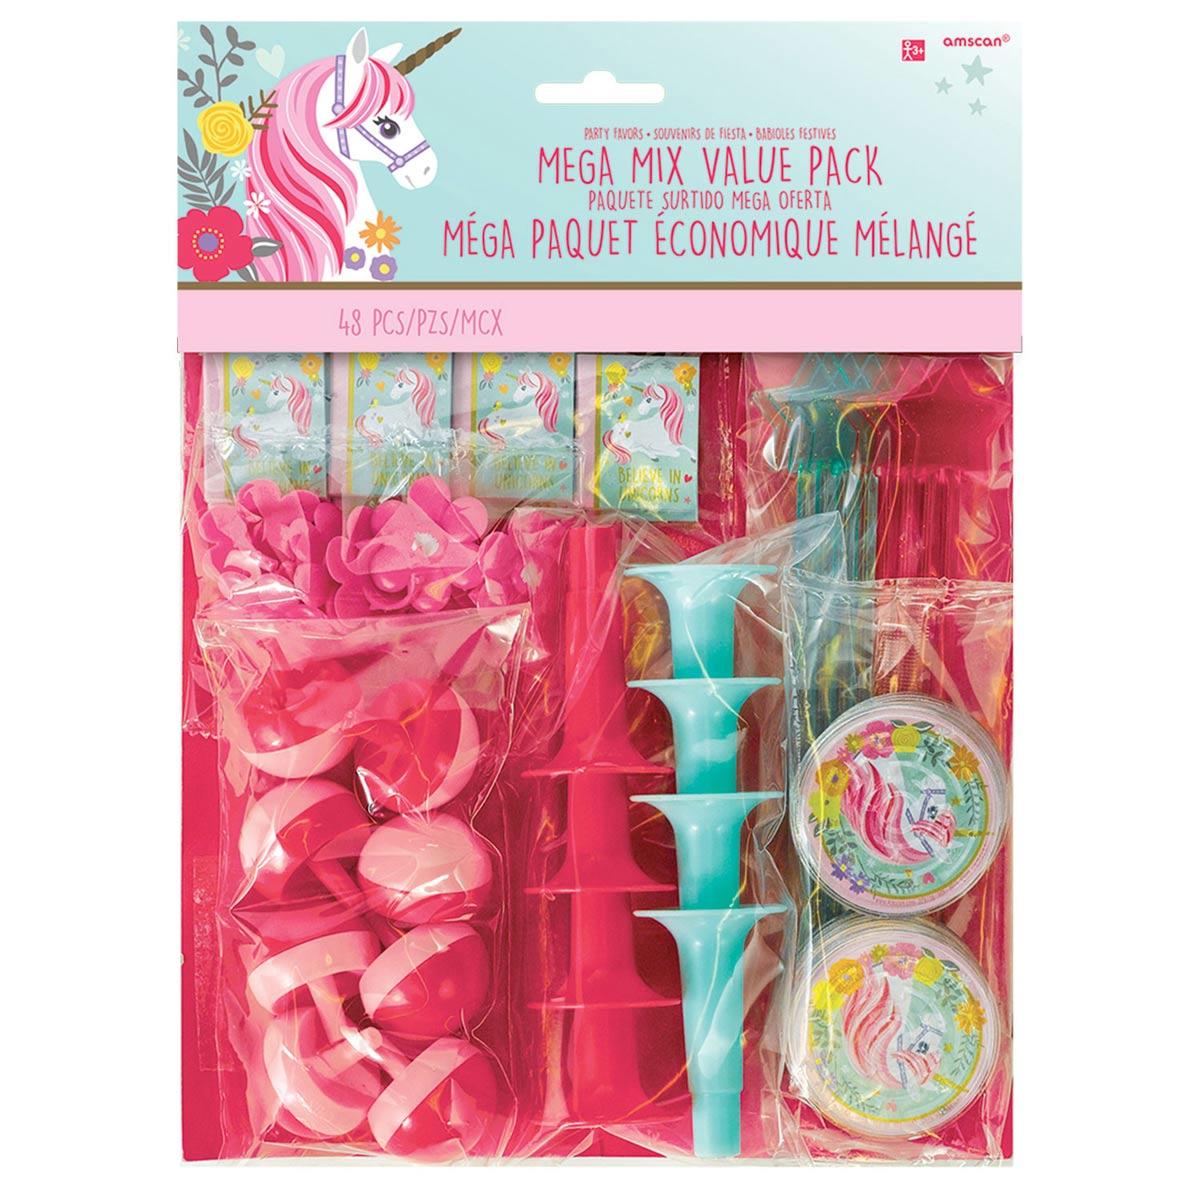 Magical Unicorn Pinata Filler or Favour Pack 48pcs by Amscan 399739 available here at Karnival Costumes online party shop